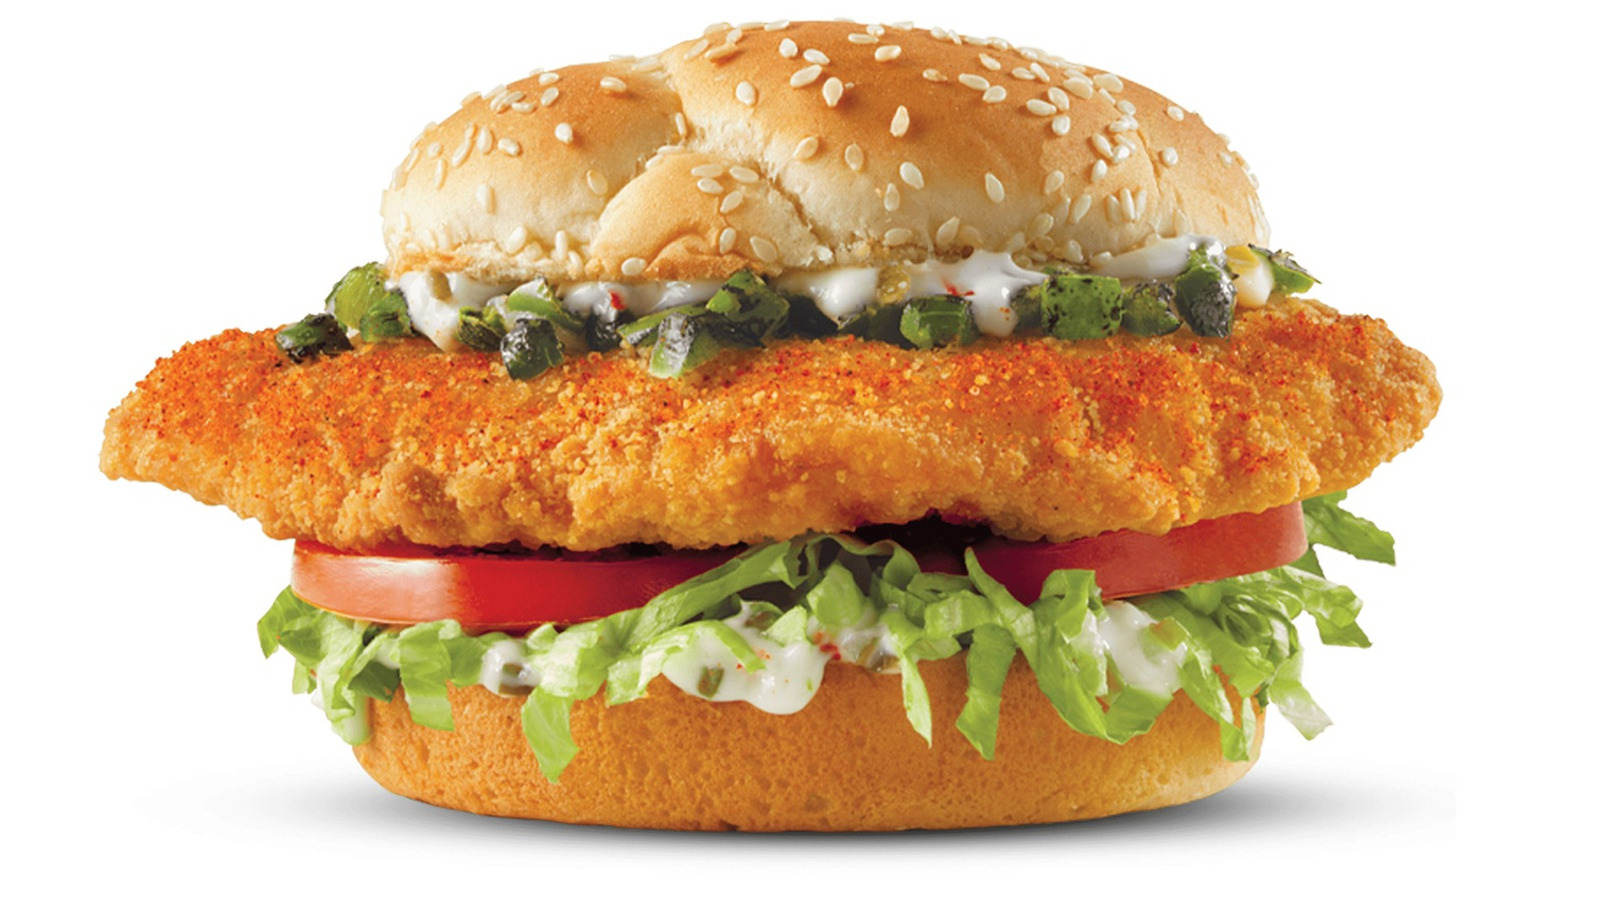 Arby's Newest Fish Sandwich Brings A Touch Of Spice To Lent